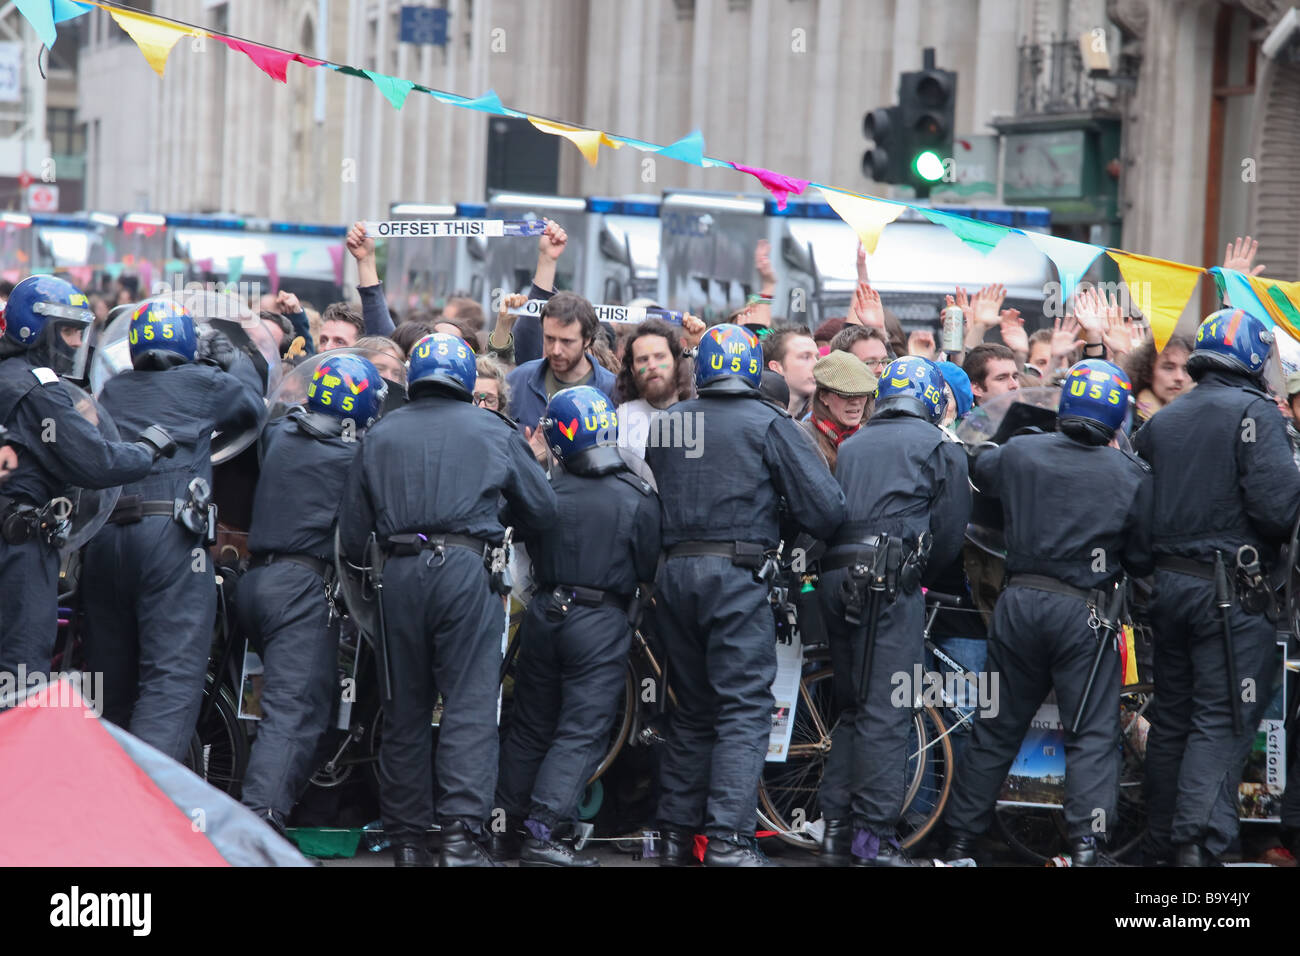 Police and climate change protesters clash at Wednesdays G20 protests in London Stock Photo